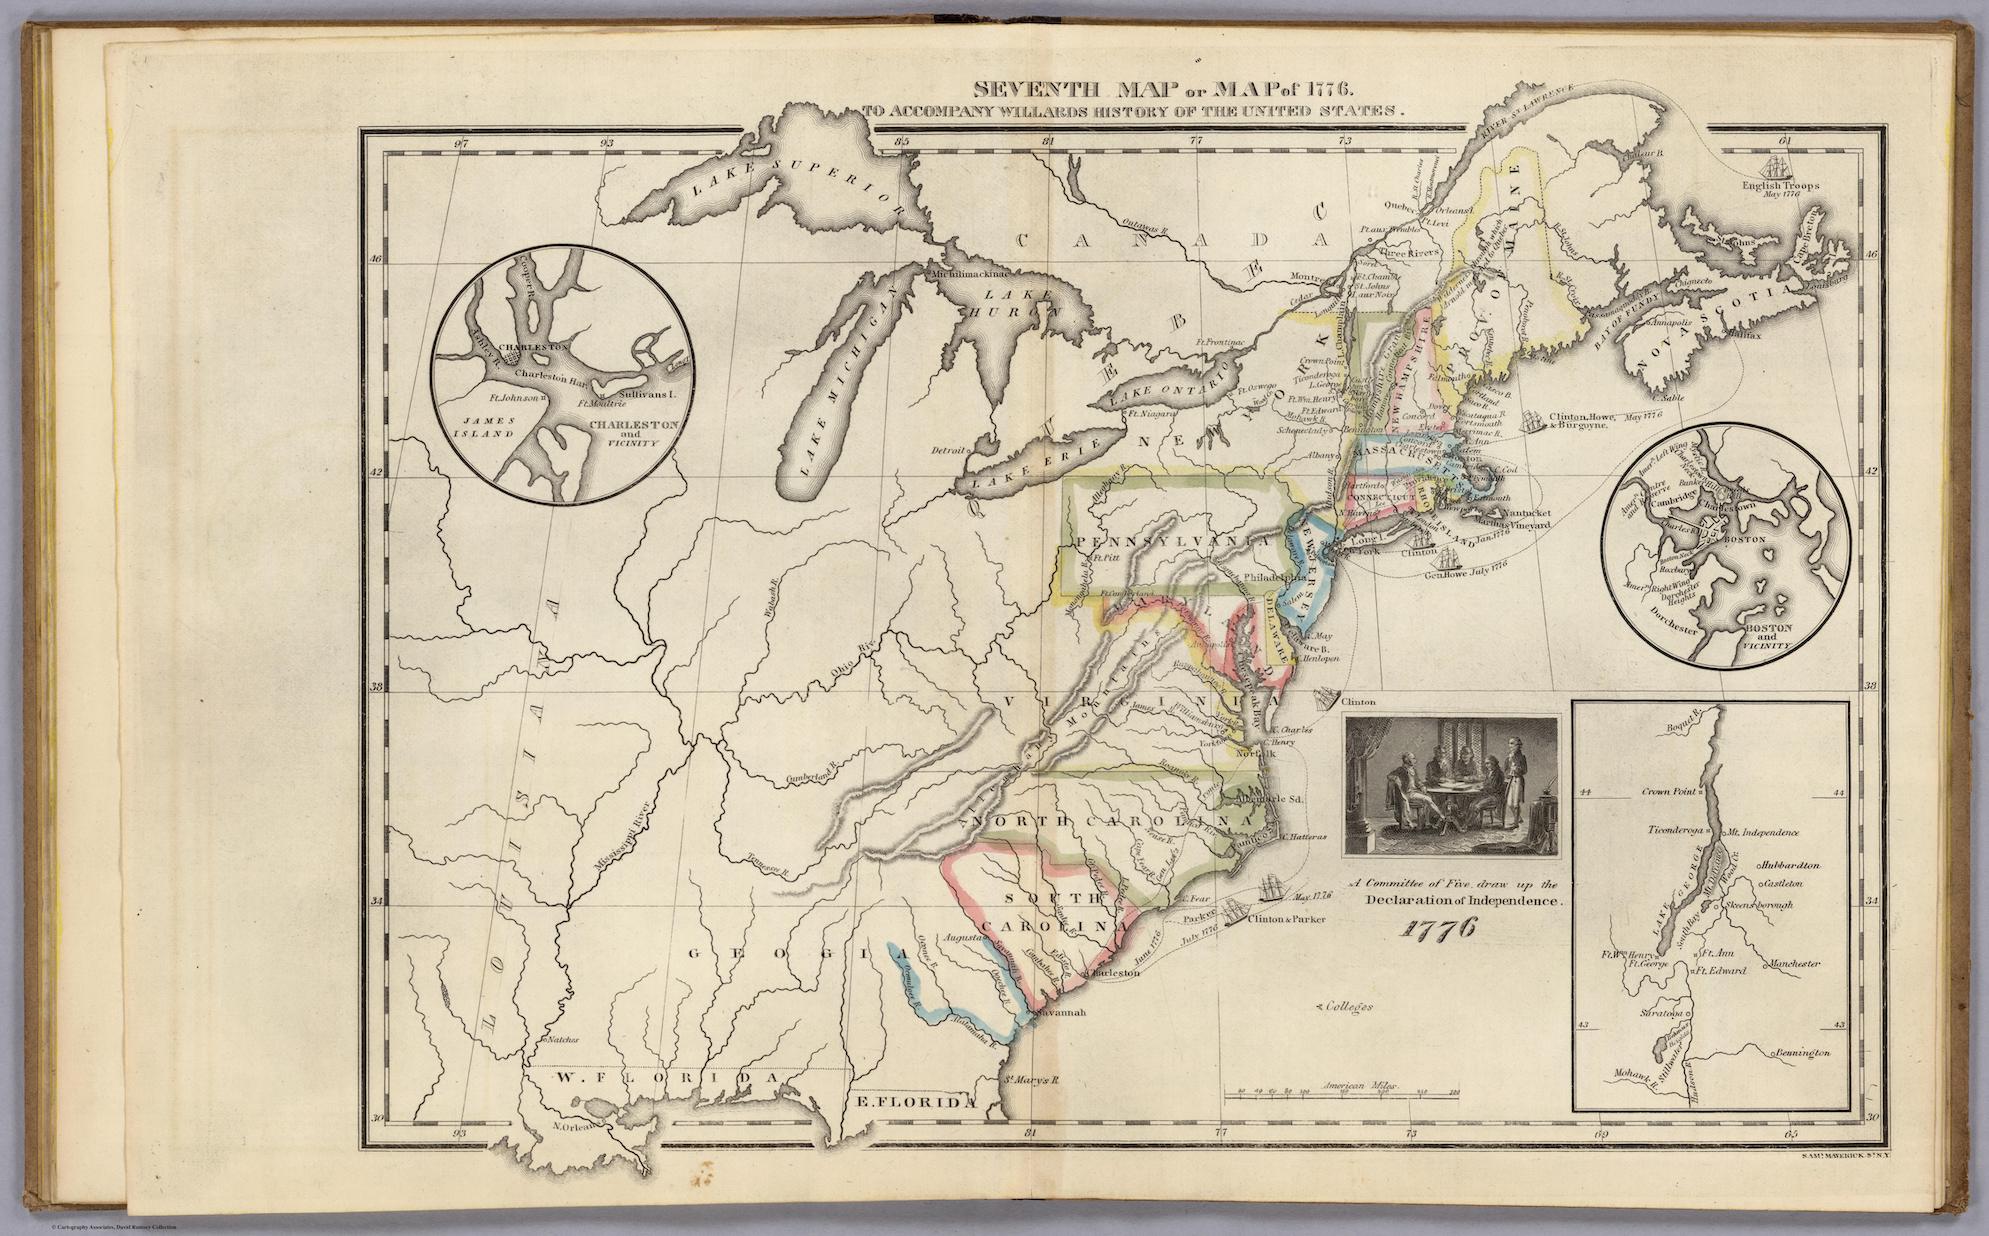 A map of the eastern half of the United States in 1776 that specifically names each Great Lake, the sprawling territory of Louisiana, as well as “Charleston and Vicinity,” in which James Island and its surroundings is depicted in a circle on the left-hand side of the page. A few places show the landscape exceeding the borders of the map, such as Lake Superior and River St. Lawrence at the top of the page crossing the map’s frame, as if expanding so greatly the visual cannot contain it. Another close-up circle lies along the right-hand side to show a detailed view of Boston and its surrounding cities. Below the circle, a rectangle shows a zoomed-in view of Lake George and its surroundings. To the left of the rectangle, an image depicting figures sitting and standing around a table is drawn with the caption reading, “A Committee of Five draw up the Declaration of Independence.”